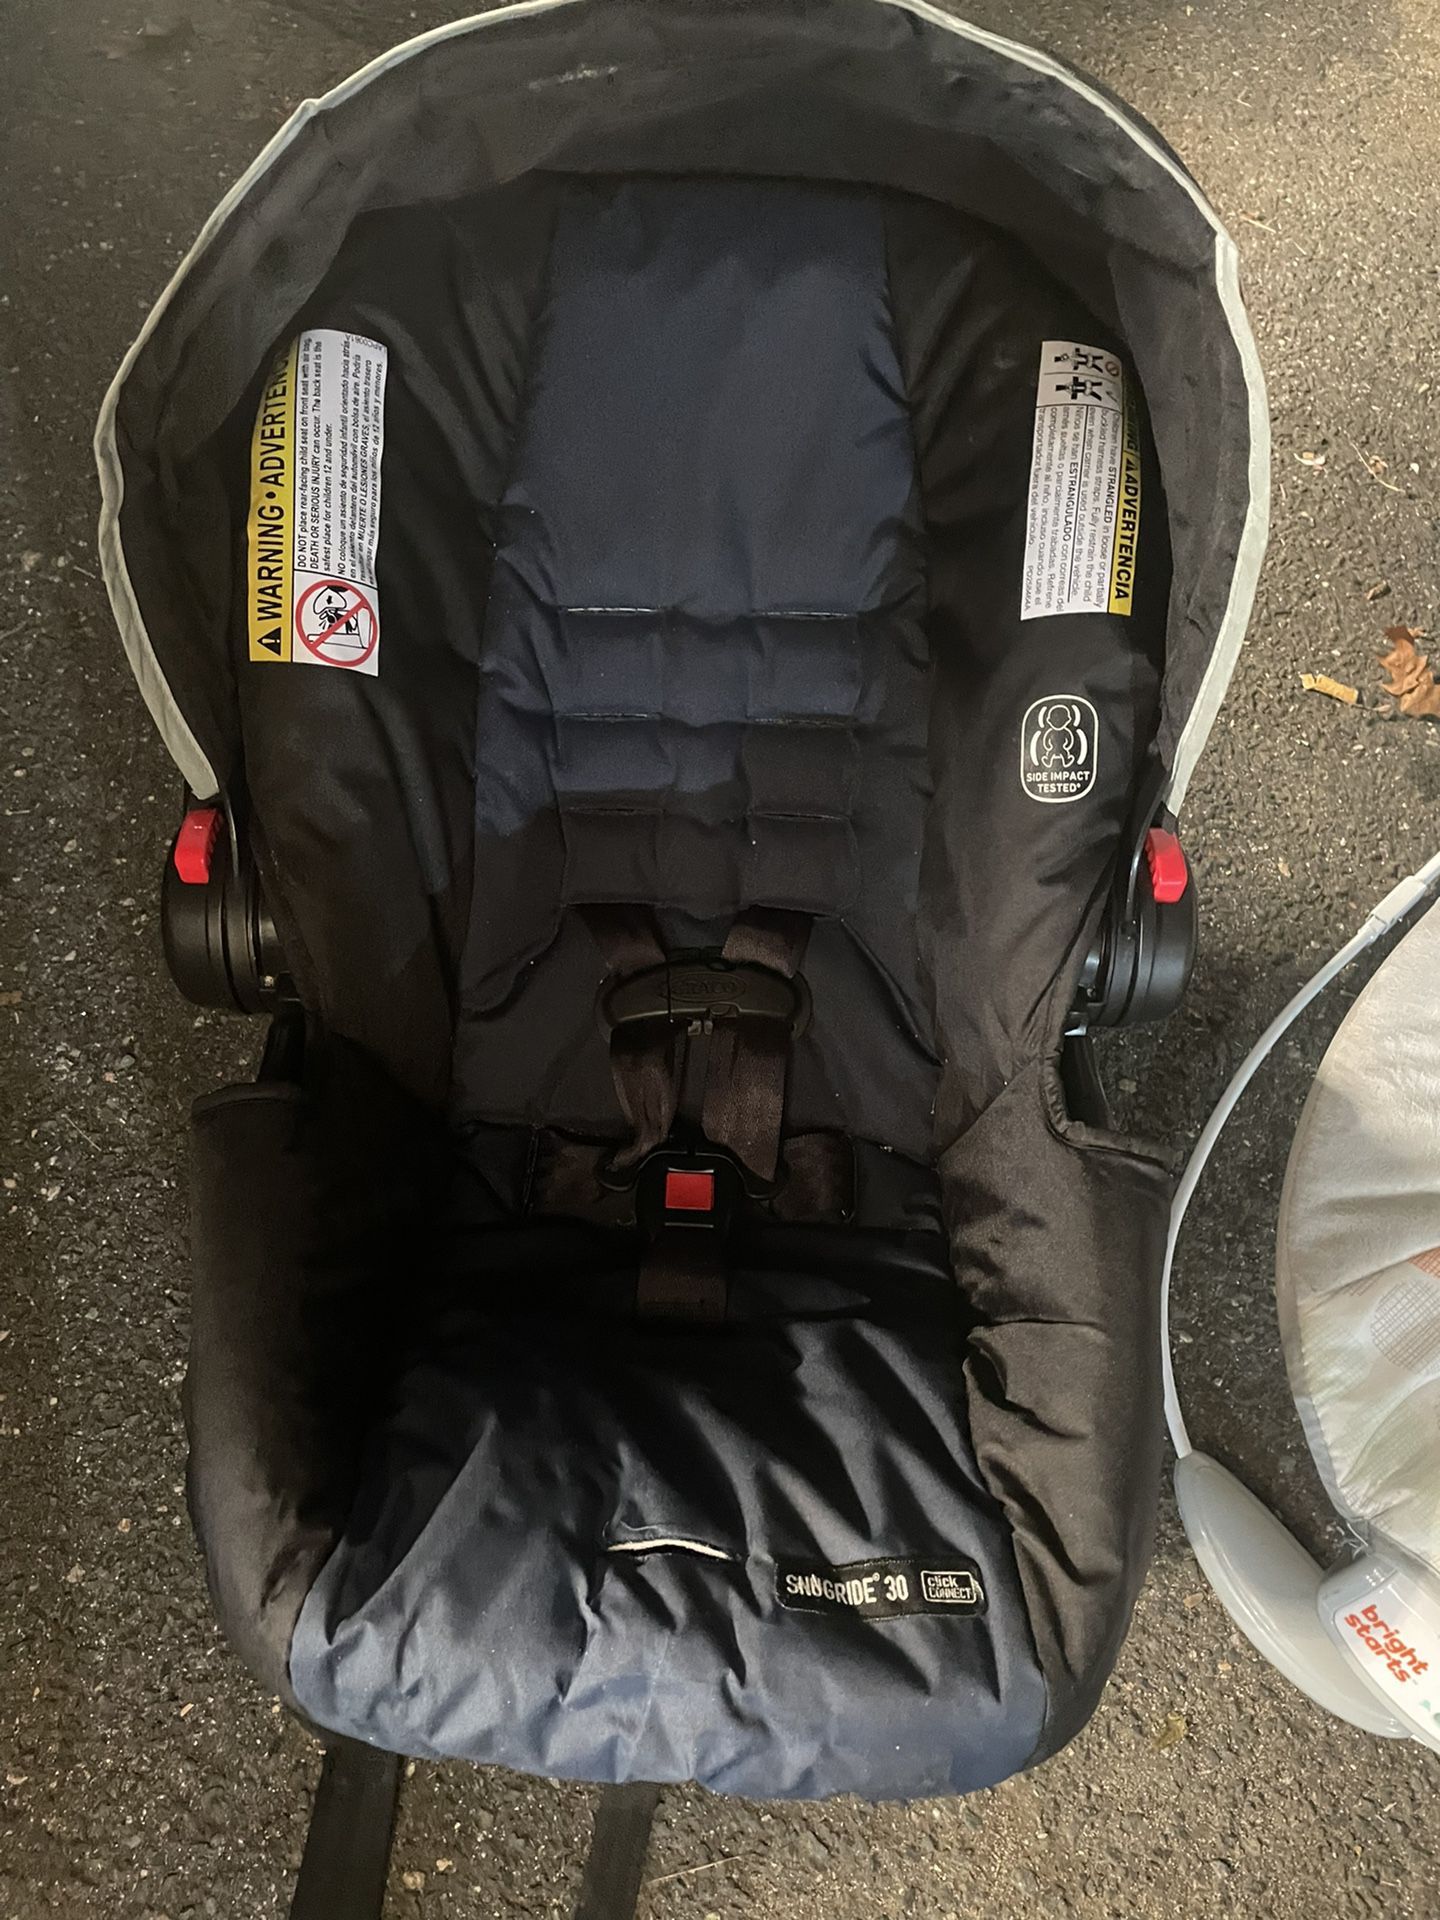 Car Seat Doesn’t Expire For 4 Years